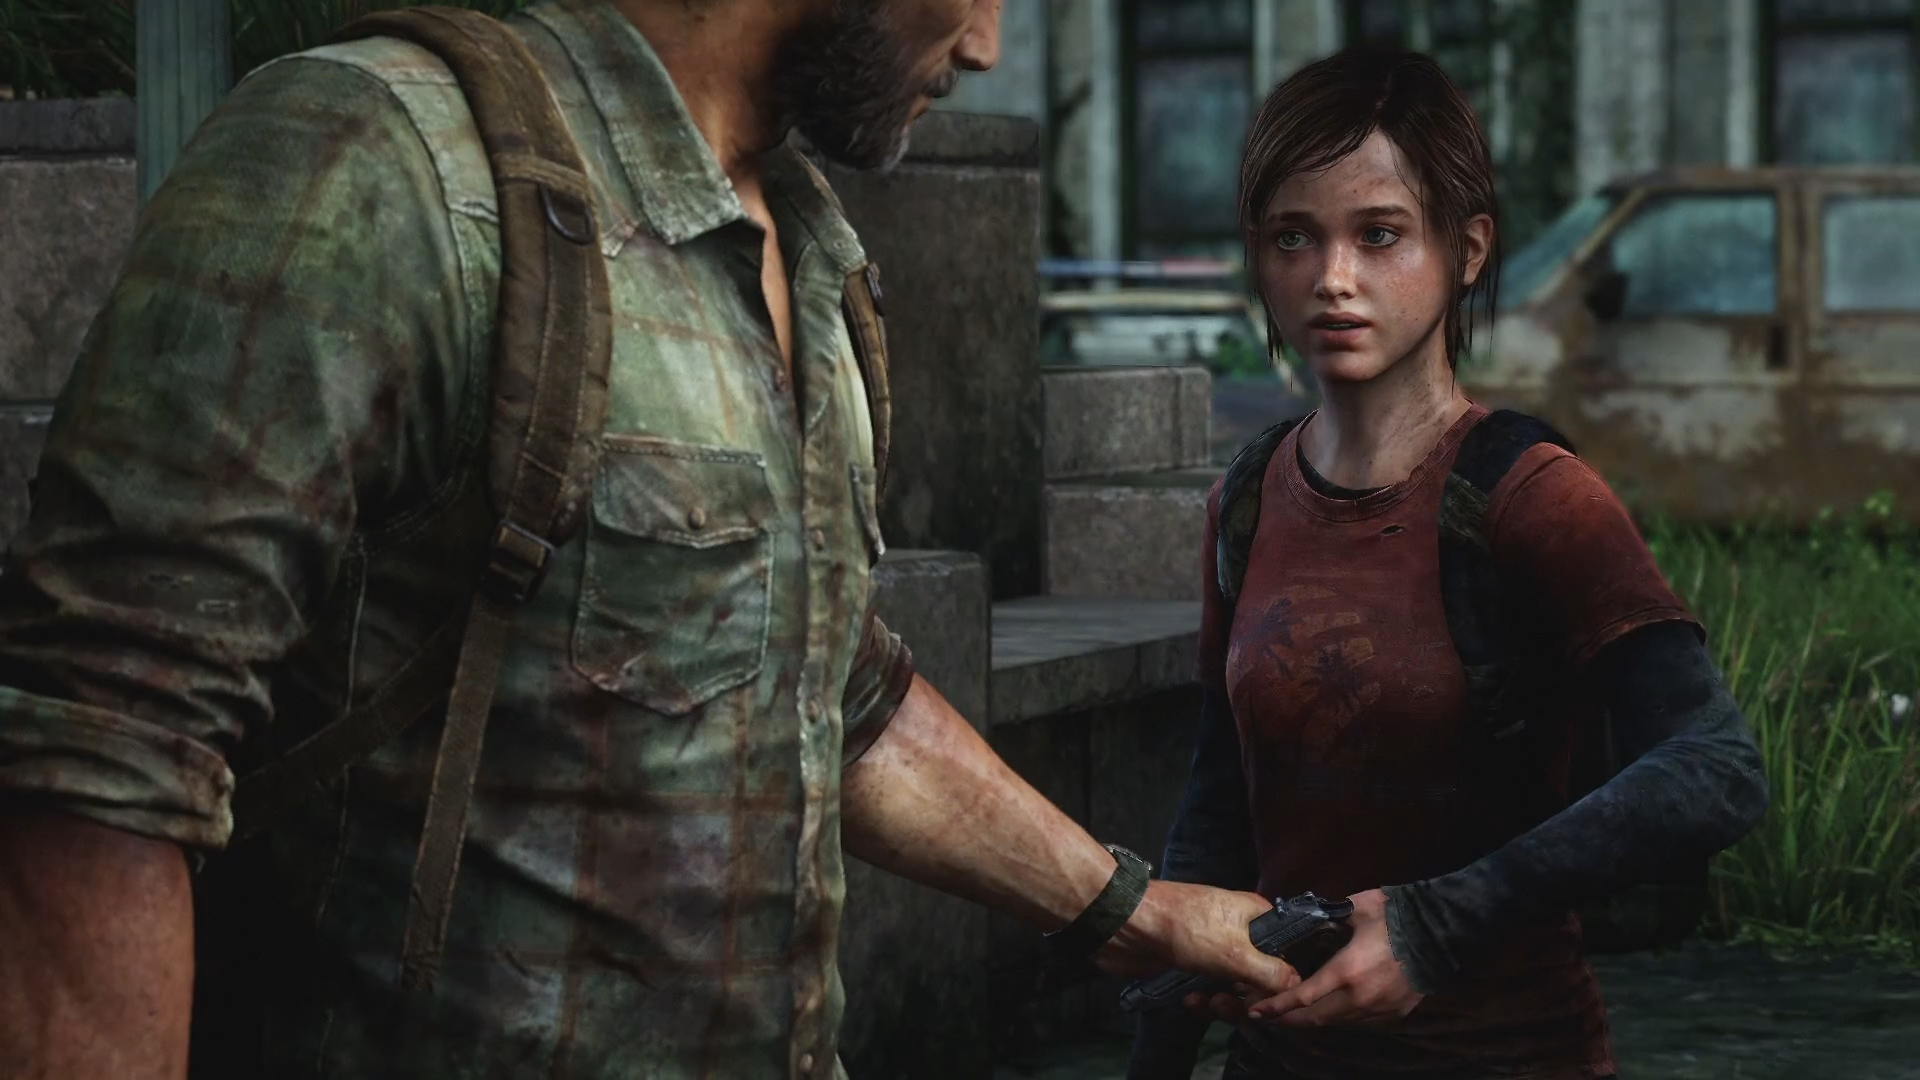 the last of us part 1 remastered download